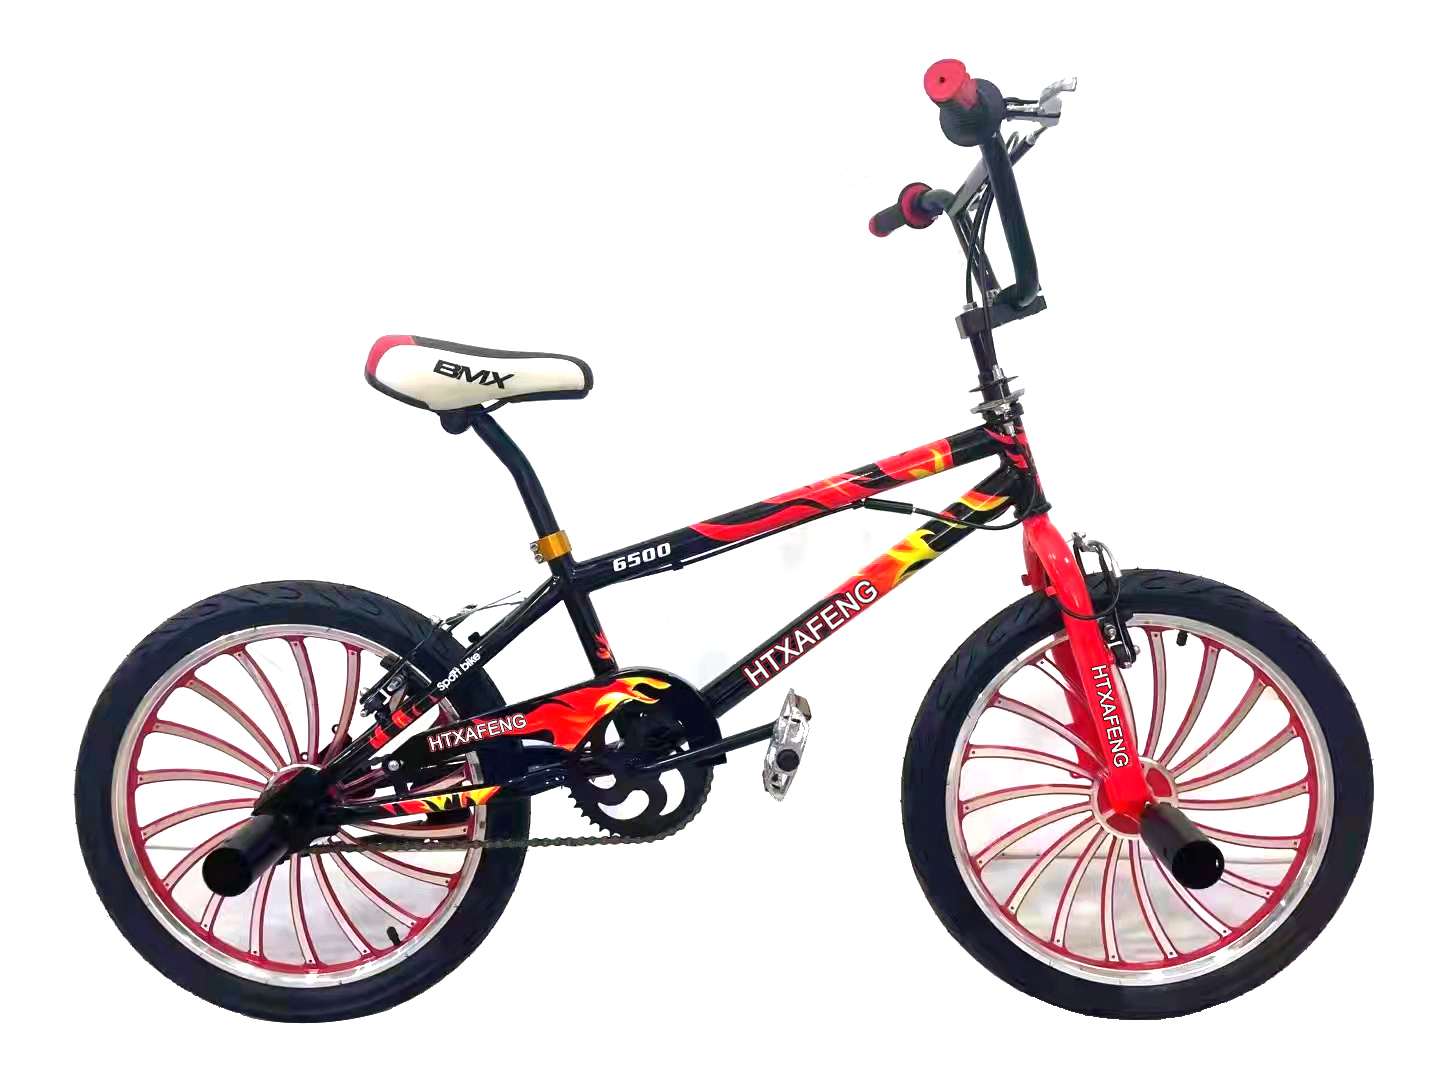 2022 new Kids Bicycle Best Quality And Cheap Price bicycle kids mountain bike for boys and girls